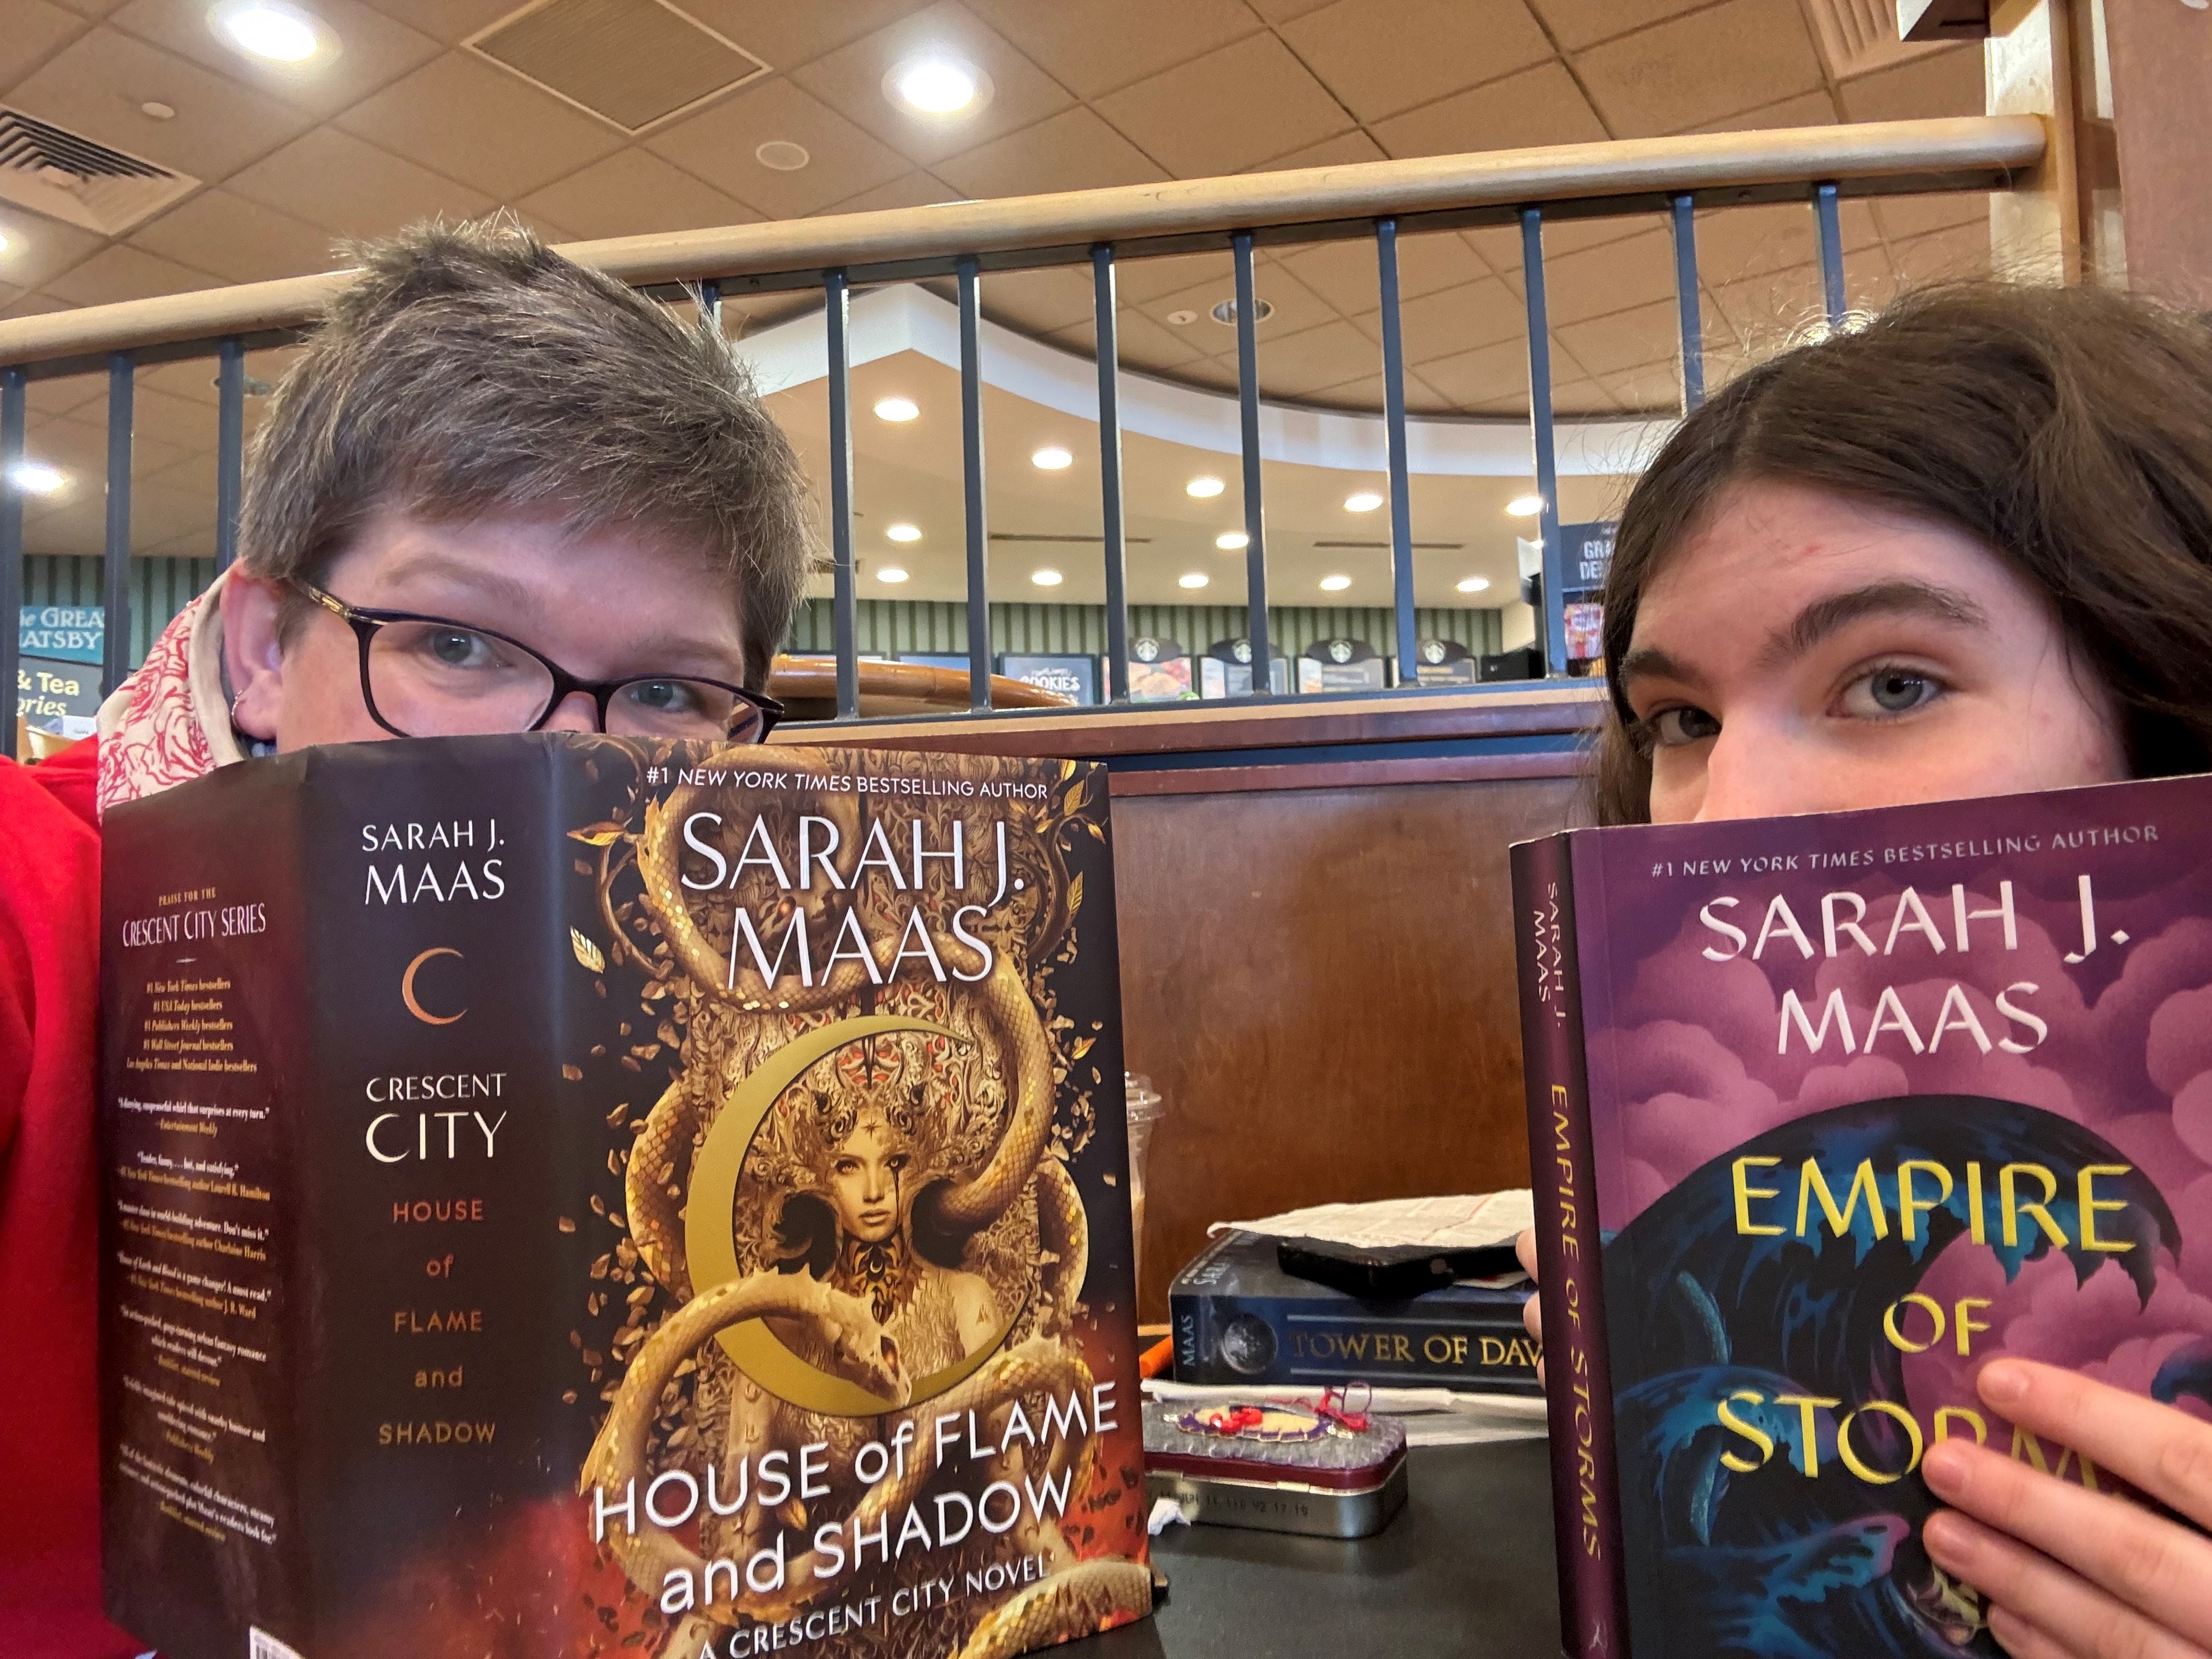 Kara peeks over the edge of House of Flame and Shadow, and her daughter peeks over the edge of Empire of Storms. Both books are by Sarah J. Maas.